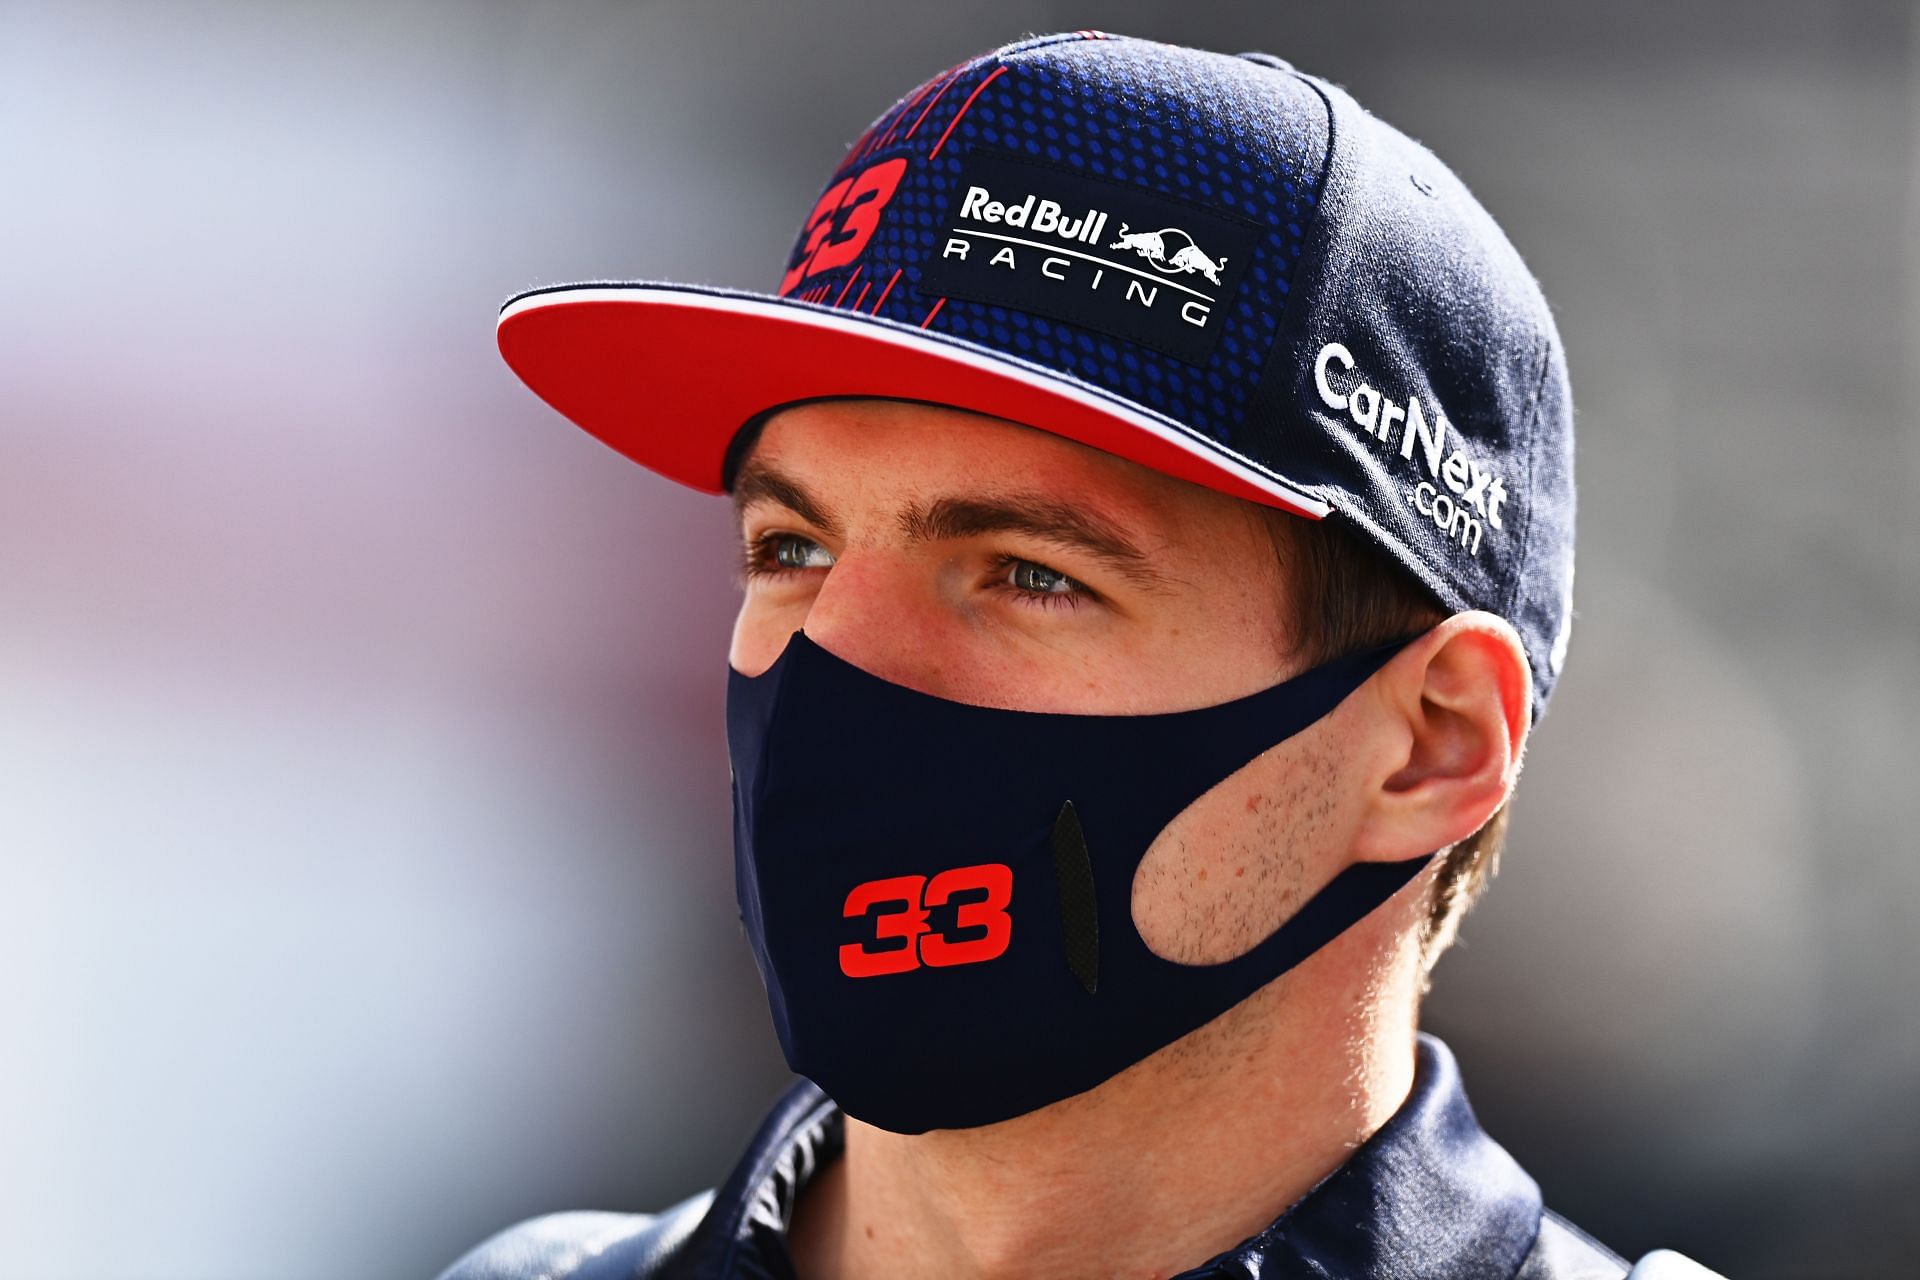 Max Verstappen walks in the paddock before practice ahead of the 2021 Mexican GP. (Photo by Clive Mason/Getty Images)